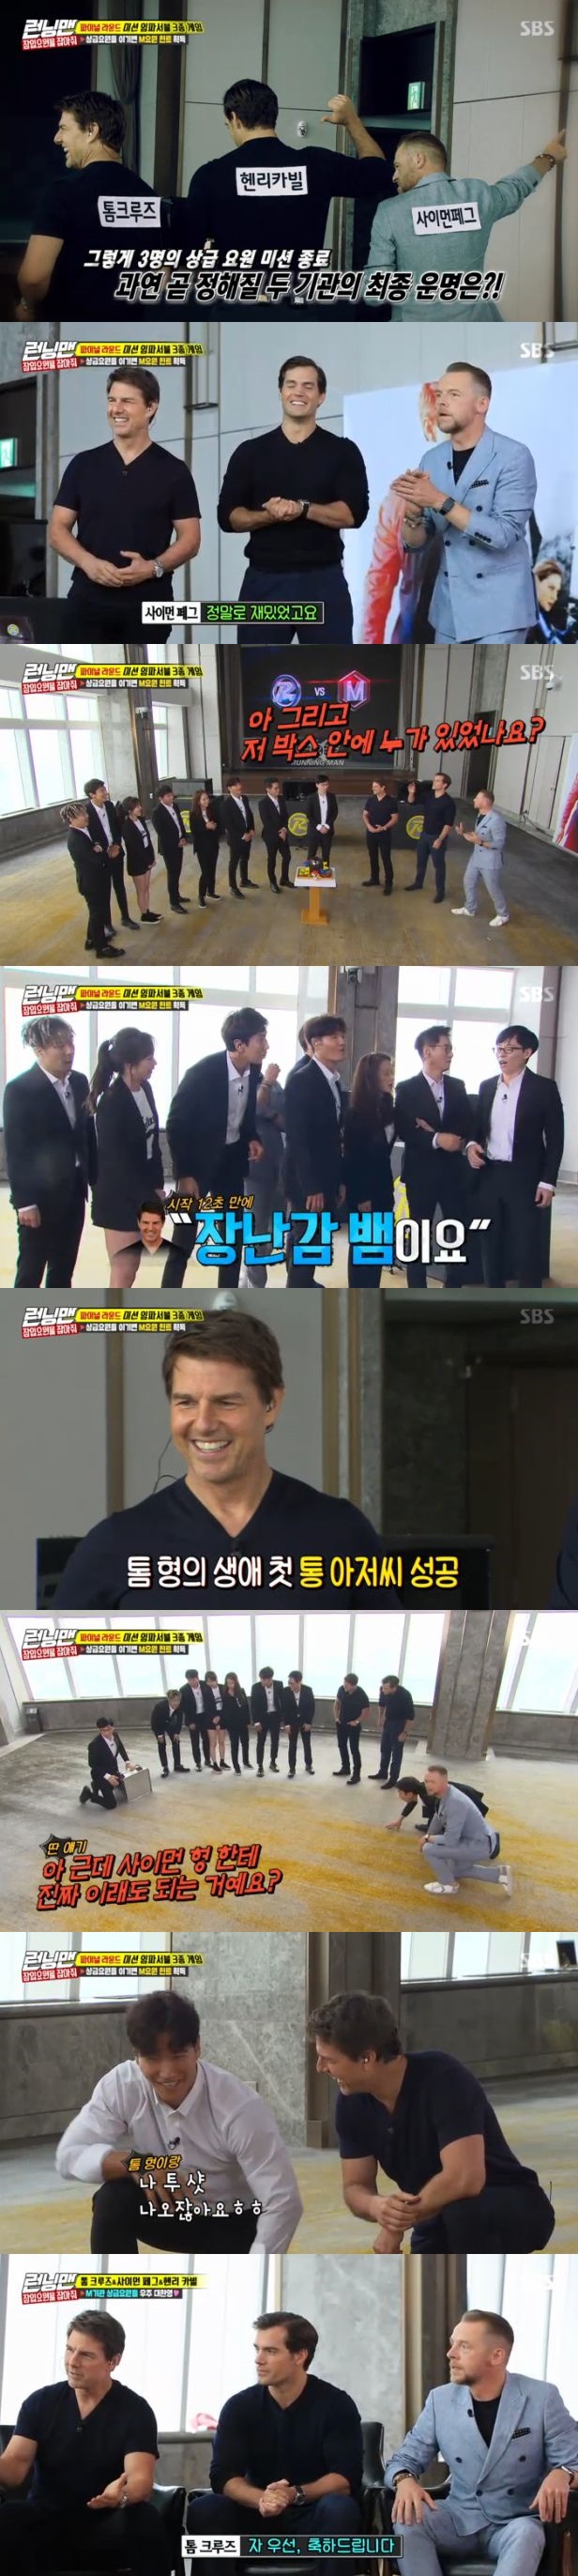 The SBS entertainment program Running Man, which was broadcasted on the afternoon of the 22nd, featured Tom Cruise, Henry Carville and Simon Pegg, the main characters of Mission Impossible: Fallout.The time given to them during the tight schedule was only an hour or so, but the members and the three actors talked about the movie and played games such as iron bag quizzes.The members could not hide their trembling as Tom Cruise, Henry Carville and Simon Pegg entered the recording studio.Lee Kwang-soo laughed at his mouth, saying, I do not even like it if it is an excuse. Yoo Jae-seok said, My big brother is my brother. My brother.First, Tom Cruise said, I am glad to be on this show. It is my ninth visit to Korea, and I am excited and excited every time I come. Henry Carville said, I will visit Korea for the first time.Thank you for inviting me. Simon Pegg showed his finger heart, saying, I am coming to Korea for the first time. Starting with Simon Pegg, the three people showed various types of hearts and laughed.The top Hollywood actors also became naughty in Running Man. They showed their passion for winning iron bags quizzes.Simon Pegg sauntered to the front of the iron bag and got Yoo Jae-seoks Too Much Comes, while Henry Carville, by force, overpowered the members to laugh: foul (?)Is not there a story like that?Tom Cruise marked the end of the iron bag quiz. He confronted Kim Jong Kook. Simon Pegg covered Kim Jong Kooks eyes and showed off his artistic sense.Tom Cruise responded by tying his shoelaces when Yoo Jae-seok, who quizzes, took time to sing the theme song Mission Impossible.The second match is a game where you touch things in a mystery box. Simon Pegg, who confronted Song Ji-hyo, answered the correct answer in 10 seconds.Henry Carville and Tom Cruise also said the correct answer as soon as the game began: Running Man members shouted Whats the deal in a futile confrontation.The last mission was to win the title of Tom Cruise, who was appointed as a new member of the Kungsson family.After filming Running Man, Tom Cruise said he felt youre the best, it was fun, and Henry Carville said, It was fun to be on such a show.Simon Pegg also said, You were amazing. I am happy, but I think we have won.